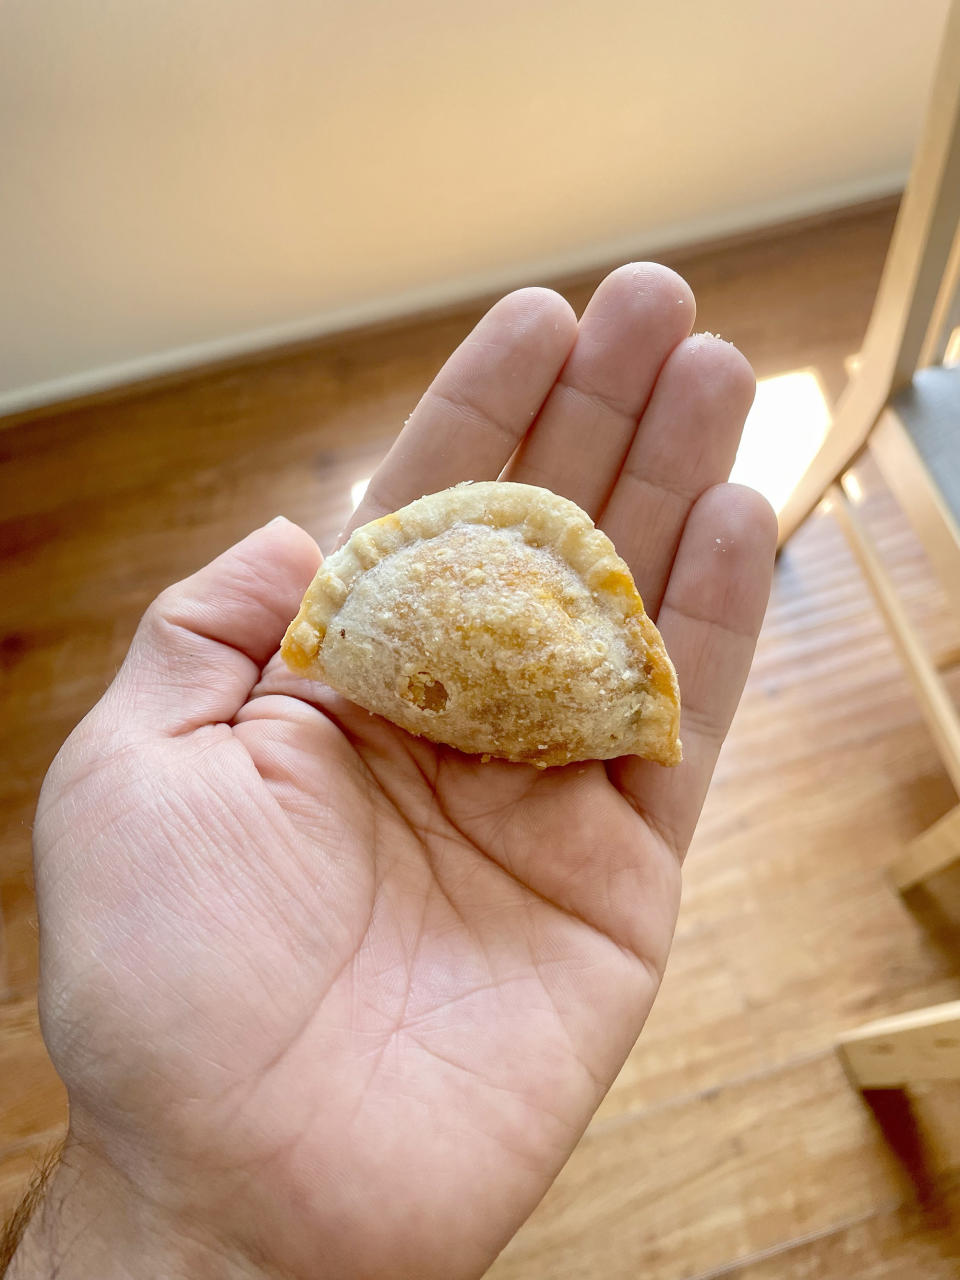 An empanada in the author's hand